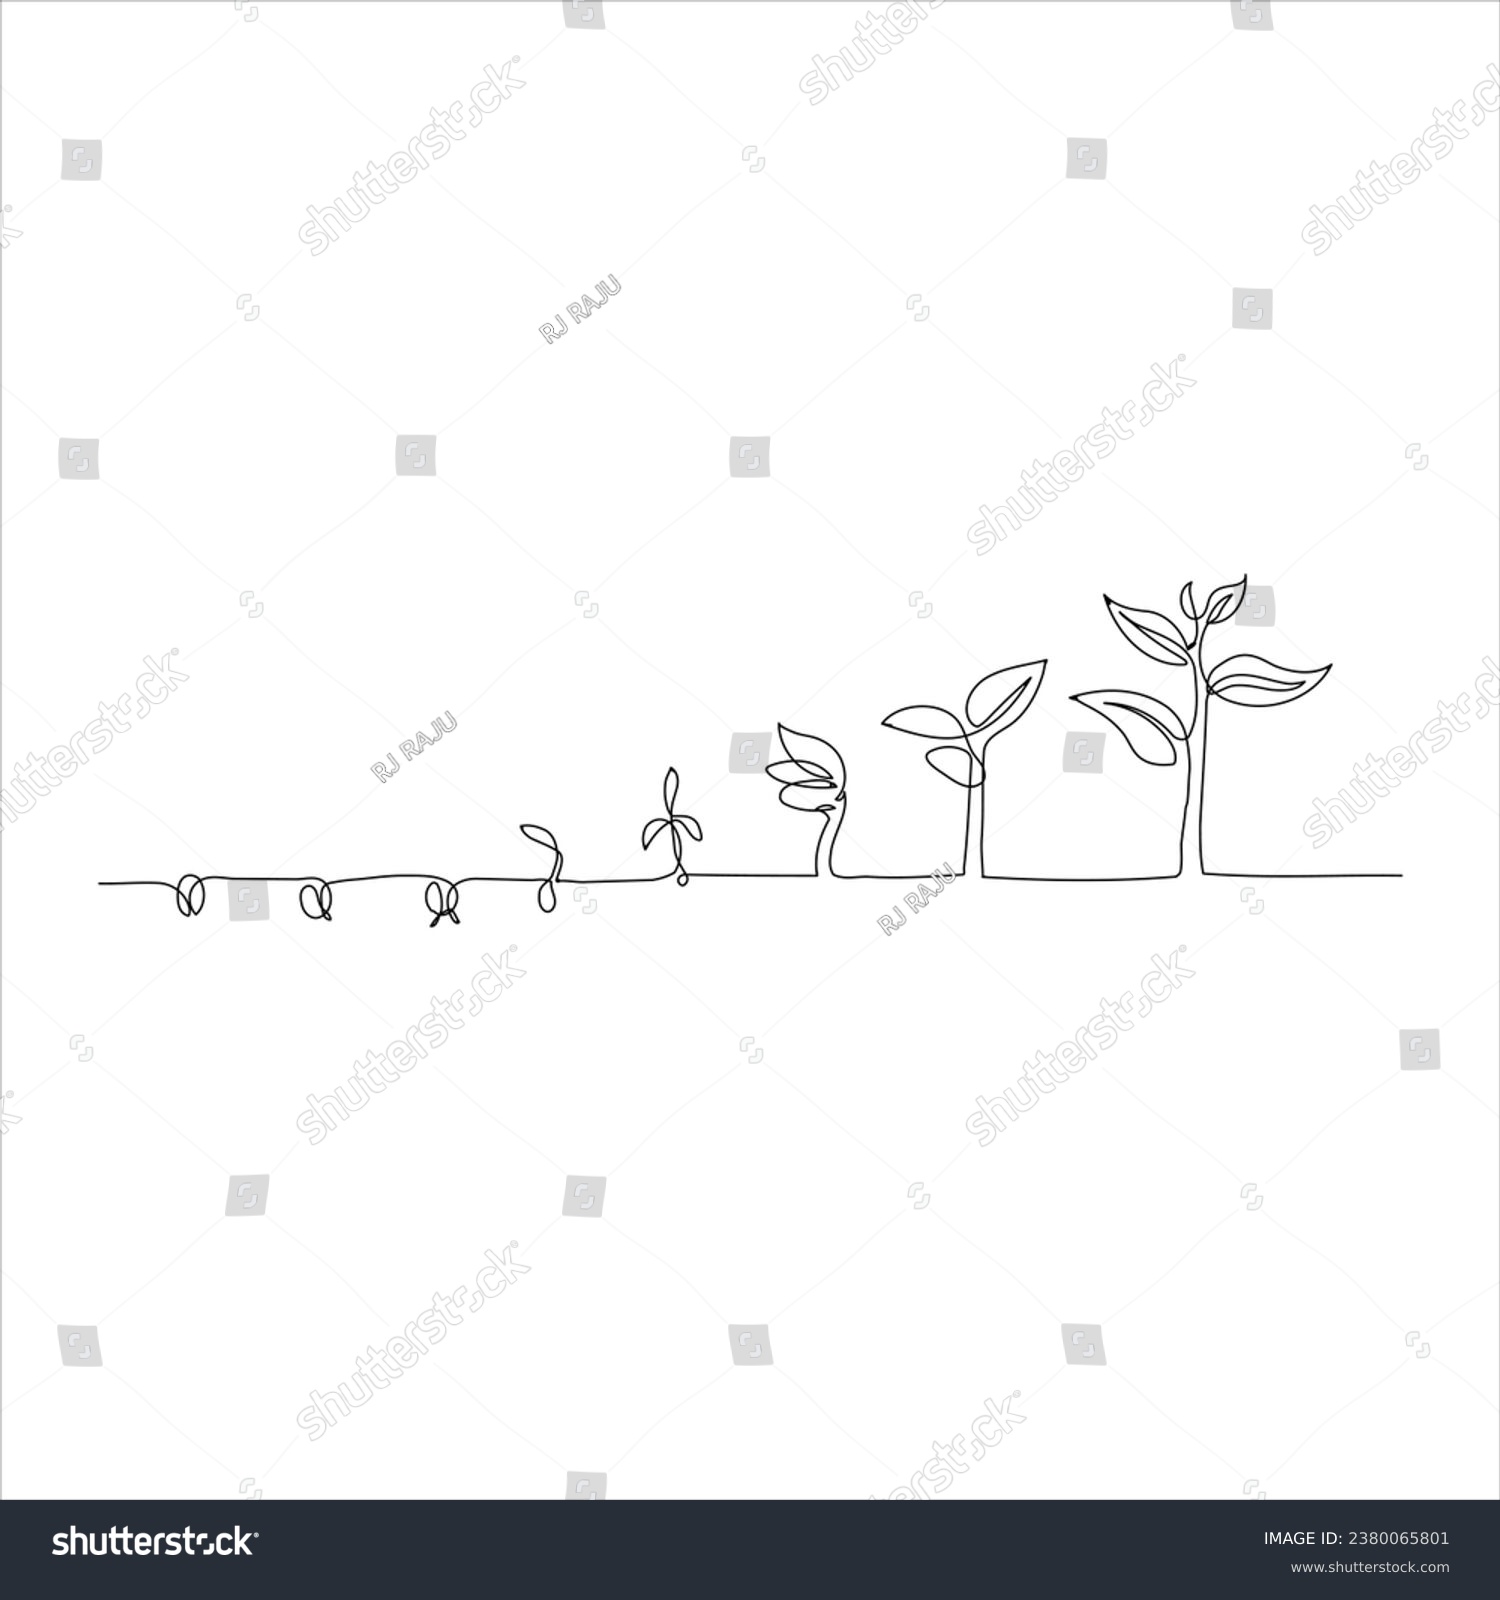 Continuous tree plant growing and seed maturation single line art vector outline illustration #2380065801